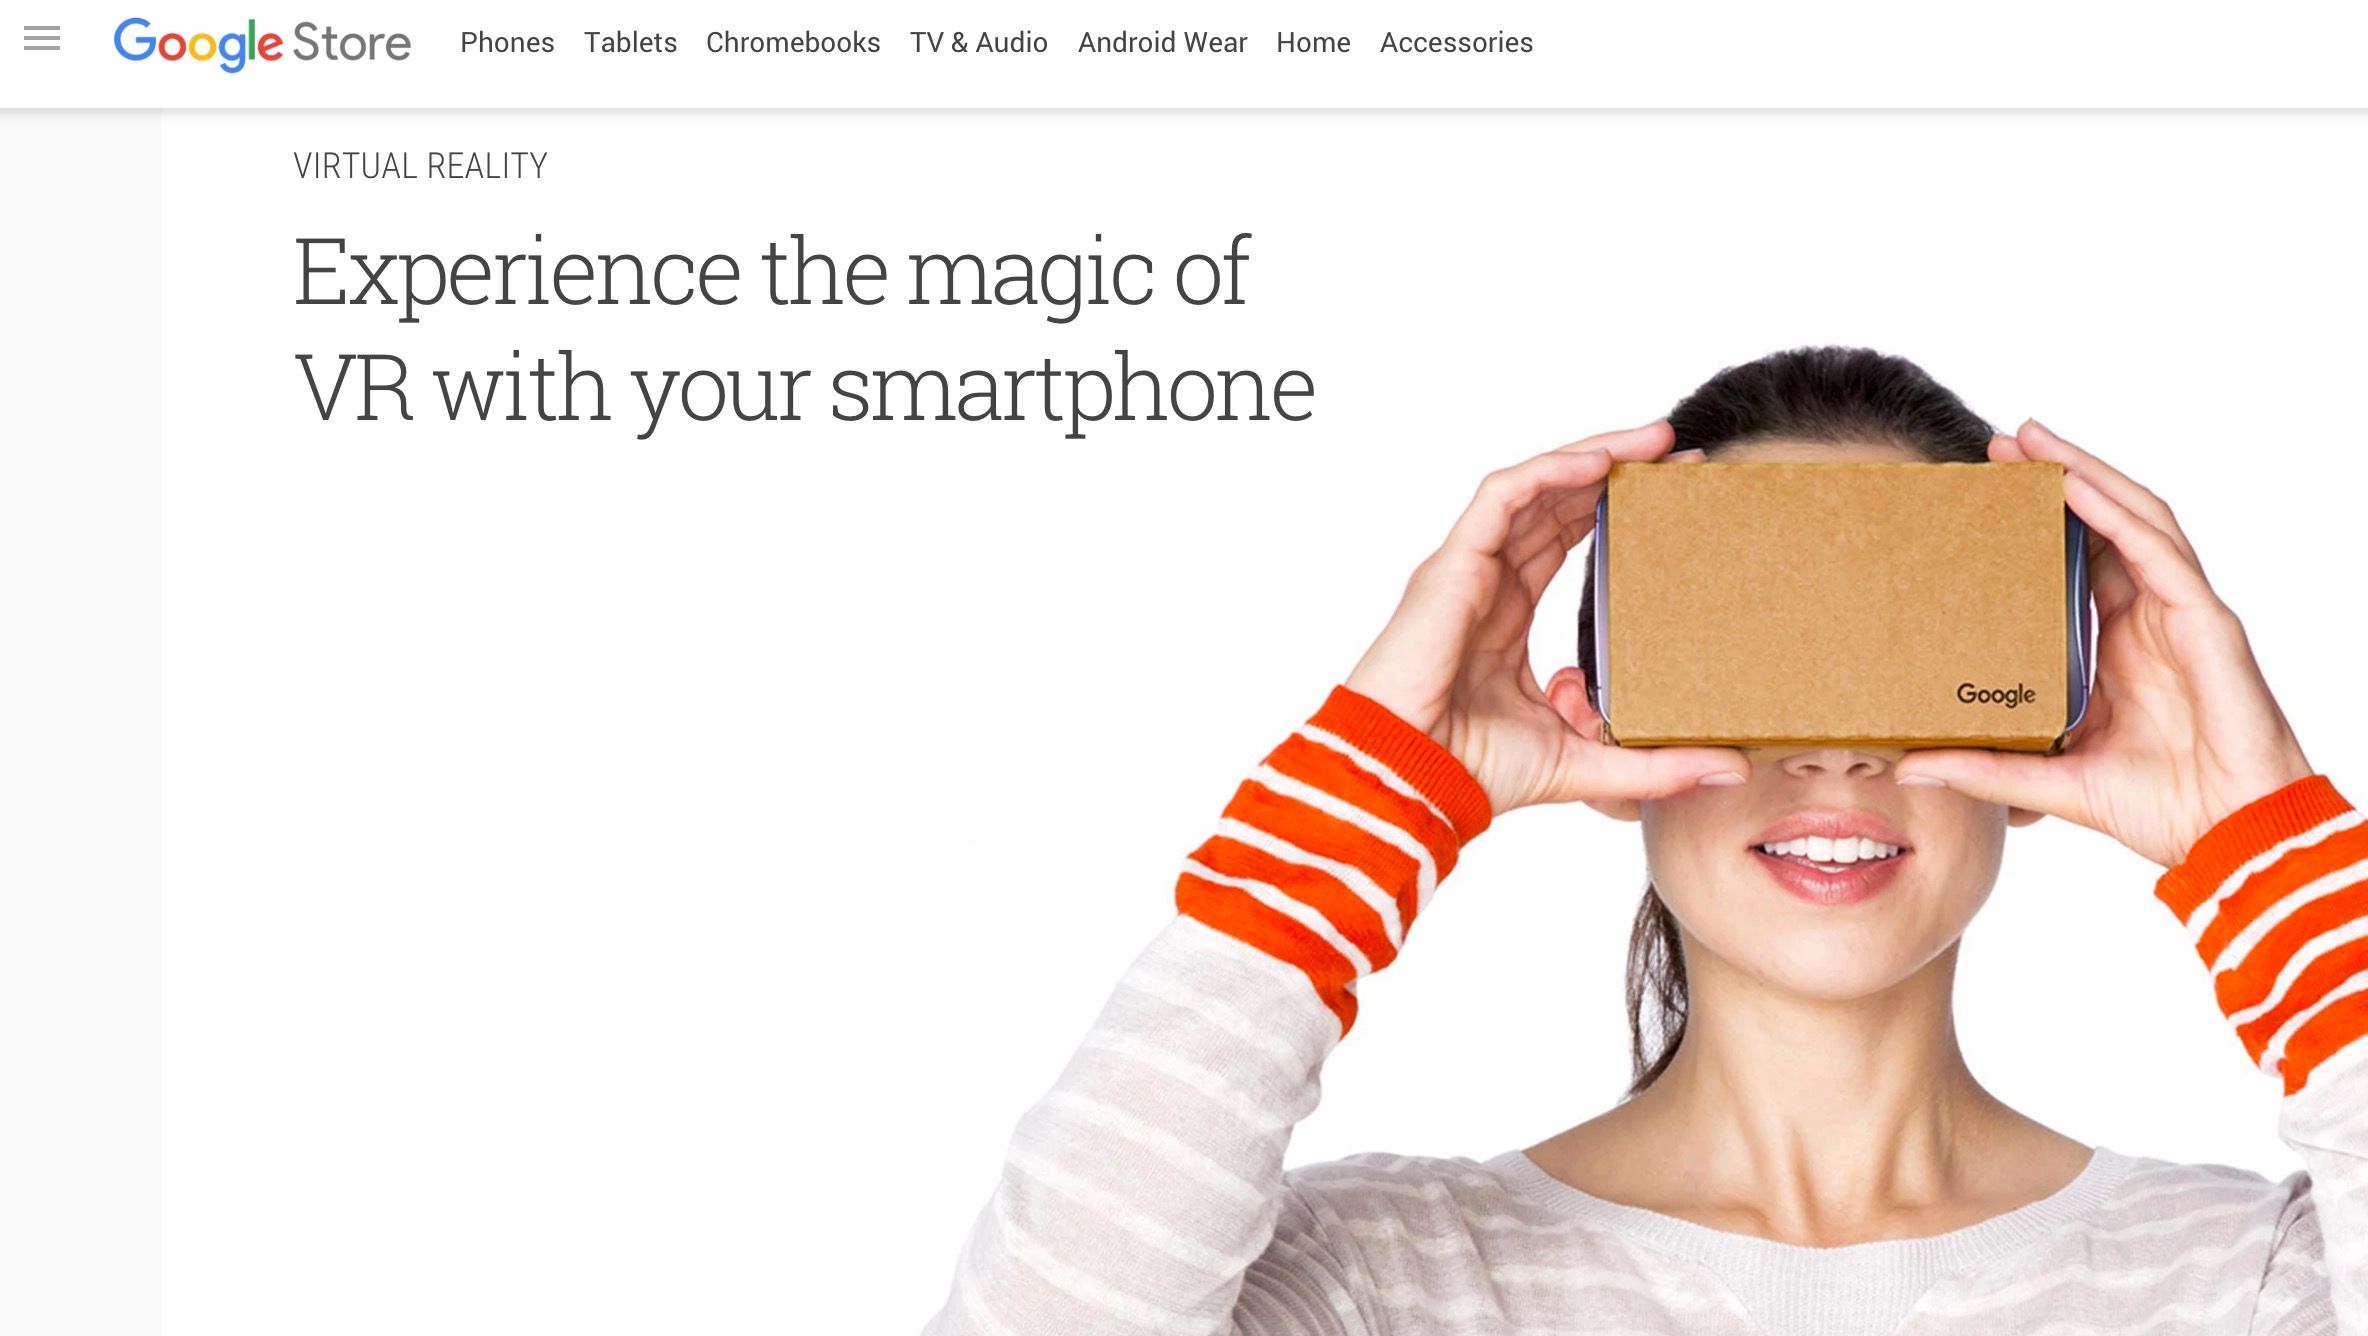 google now sells cardboard vr viewer directly through its online store image 2